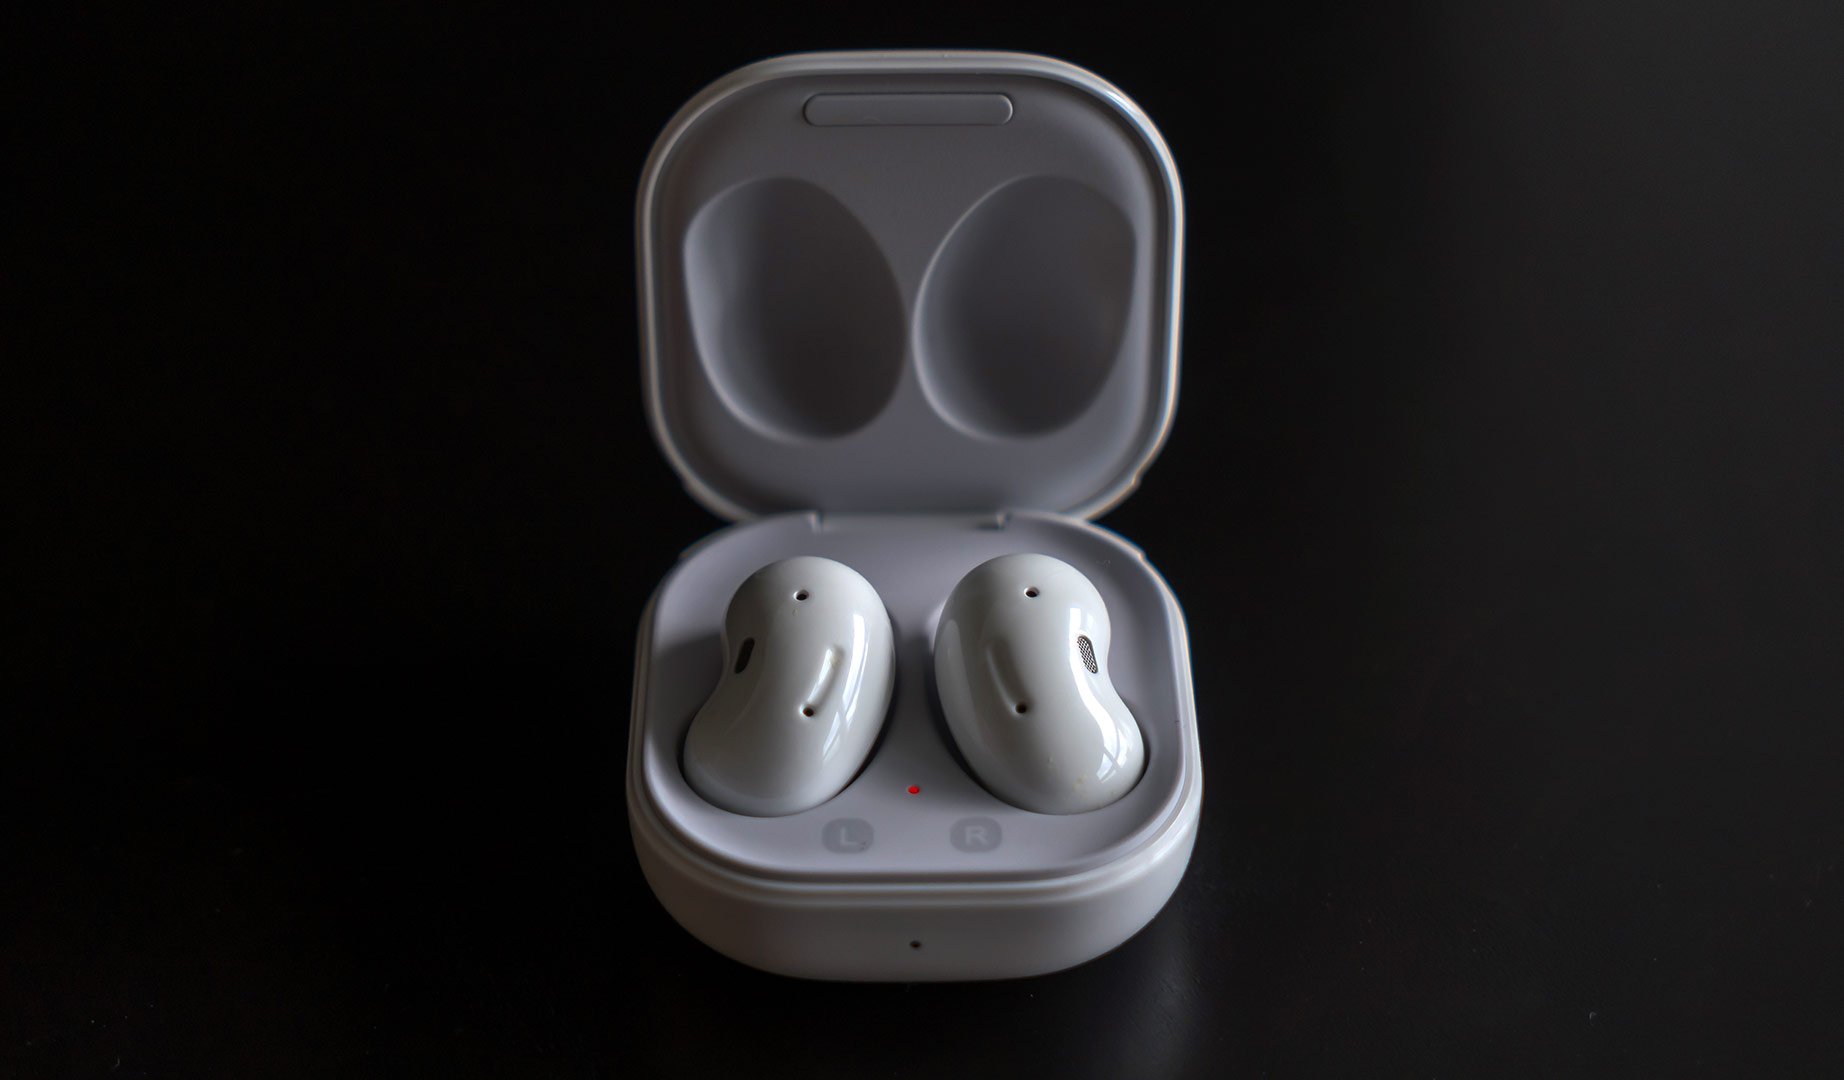 Samsung Galaxy Buds Review: Surprisingly Excellent True Wireless